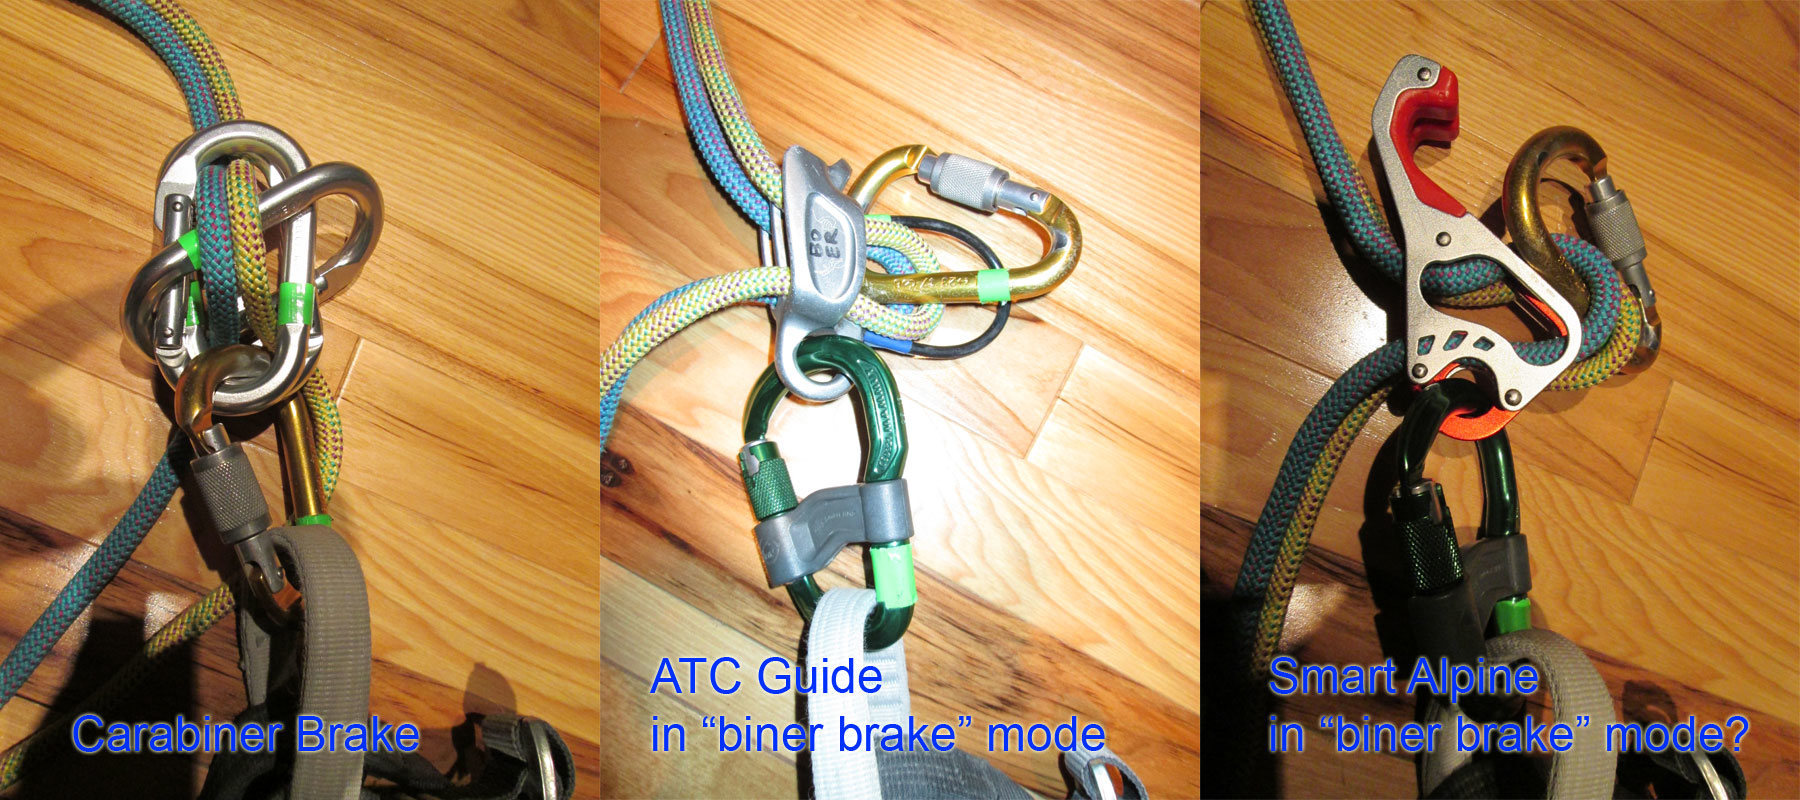 Carabiner Brake mode with ATC Guide and Mammut Alpine Smart.